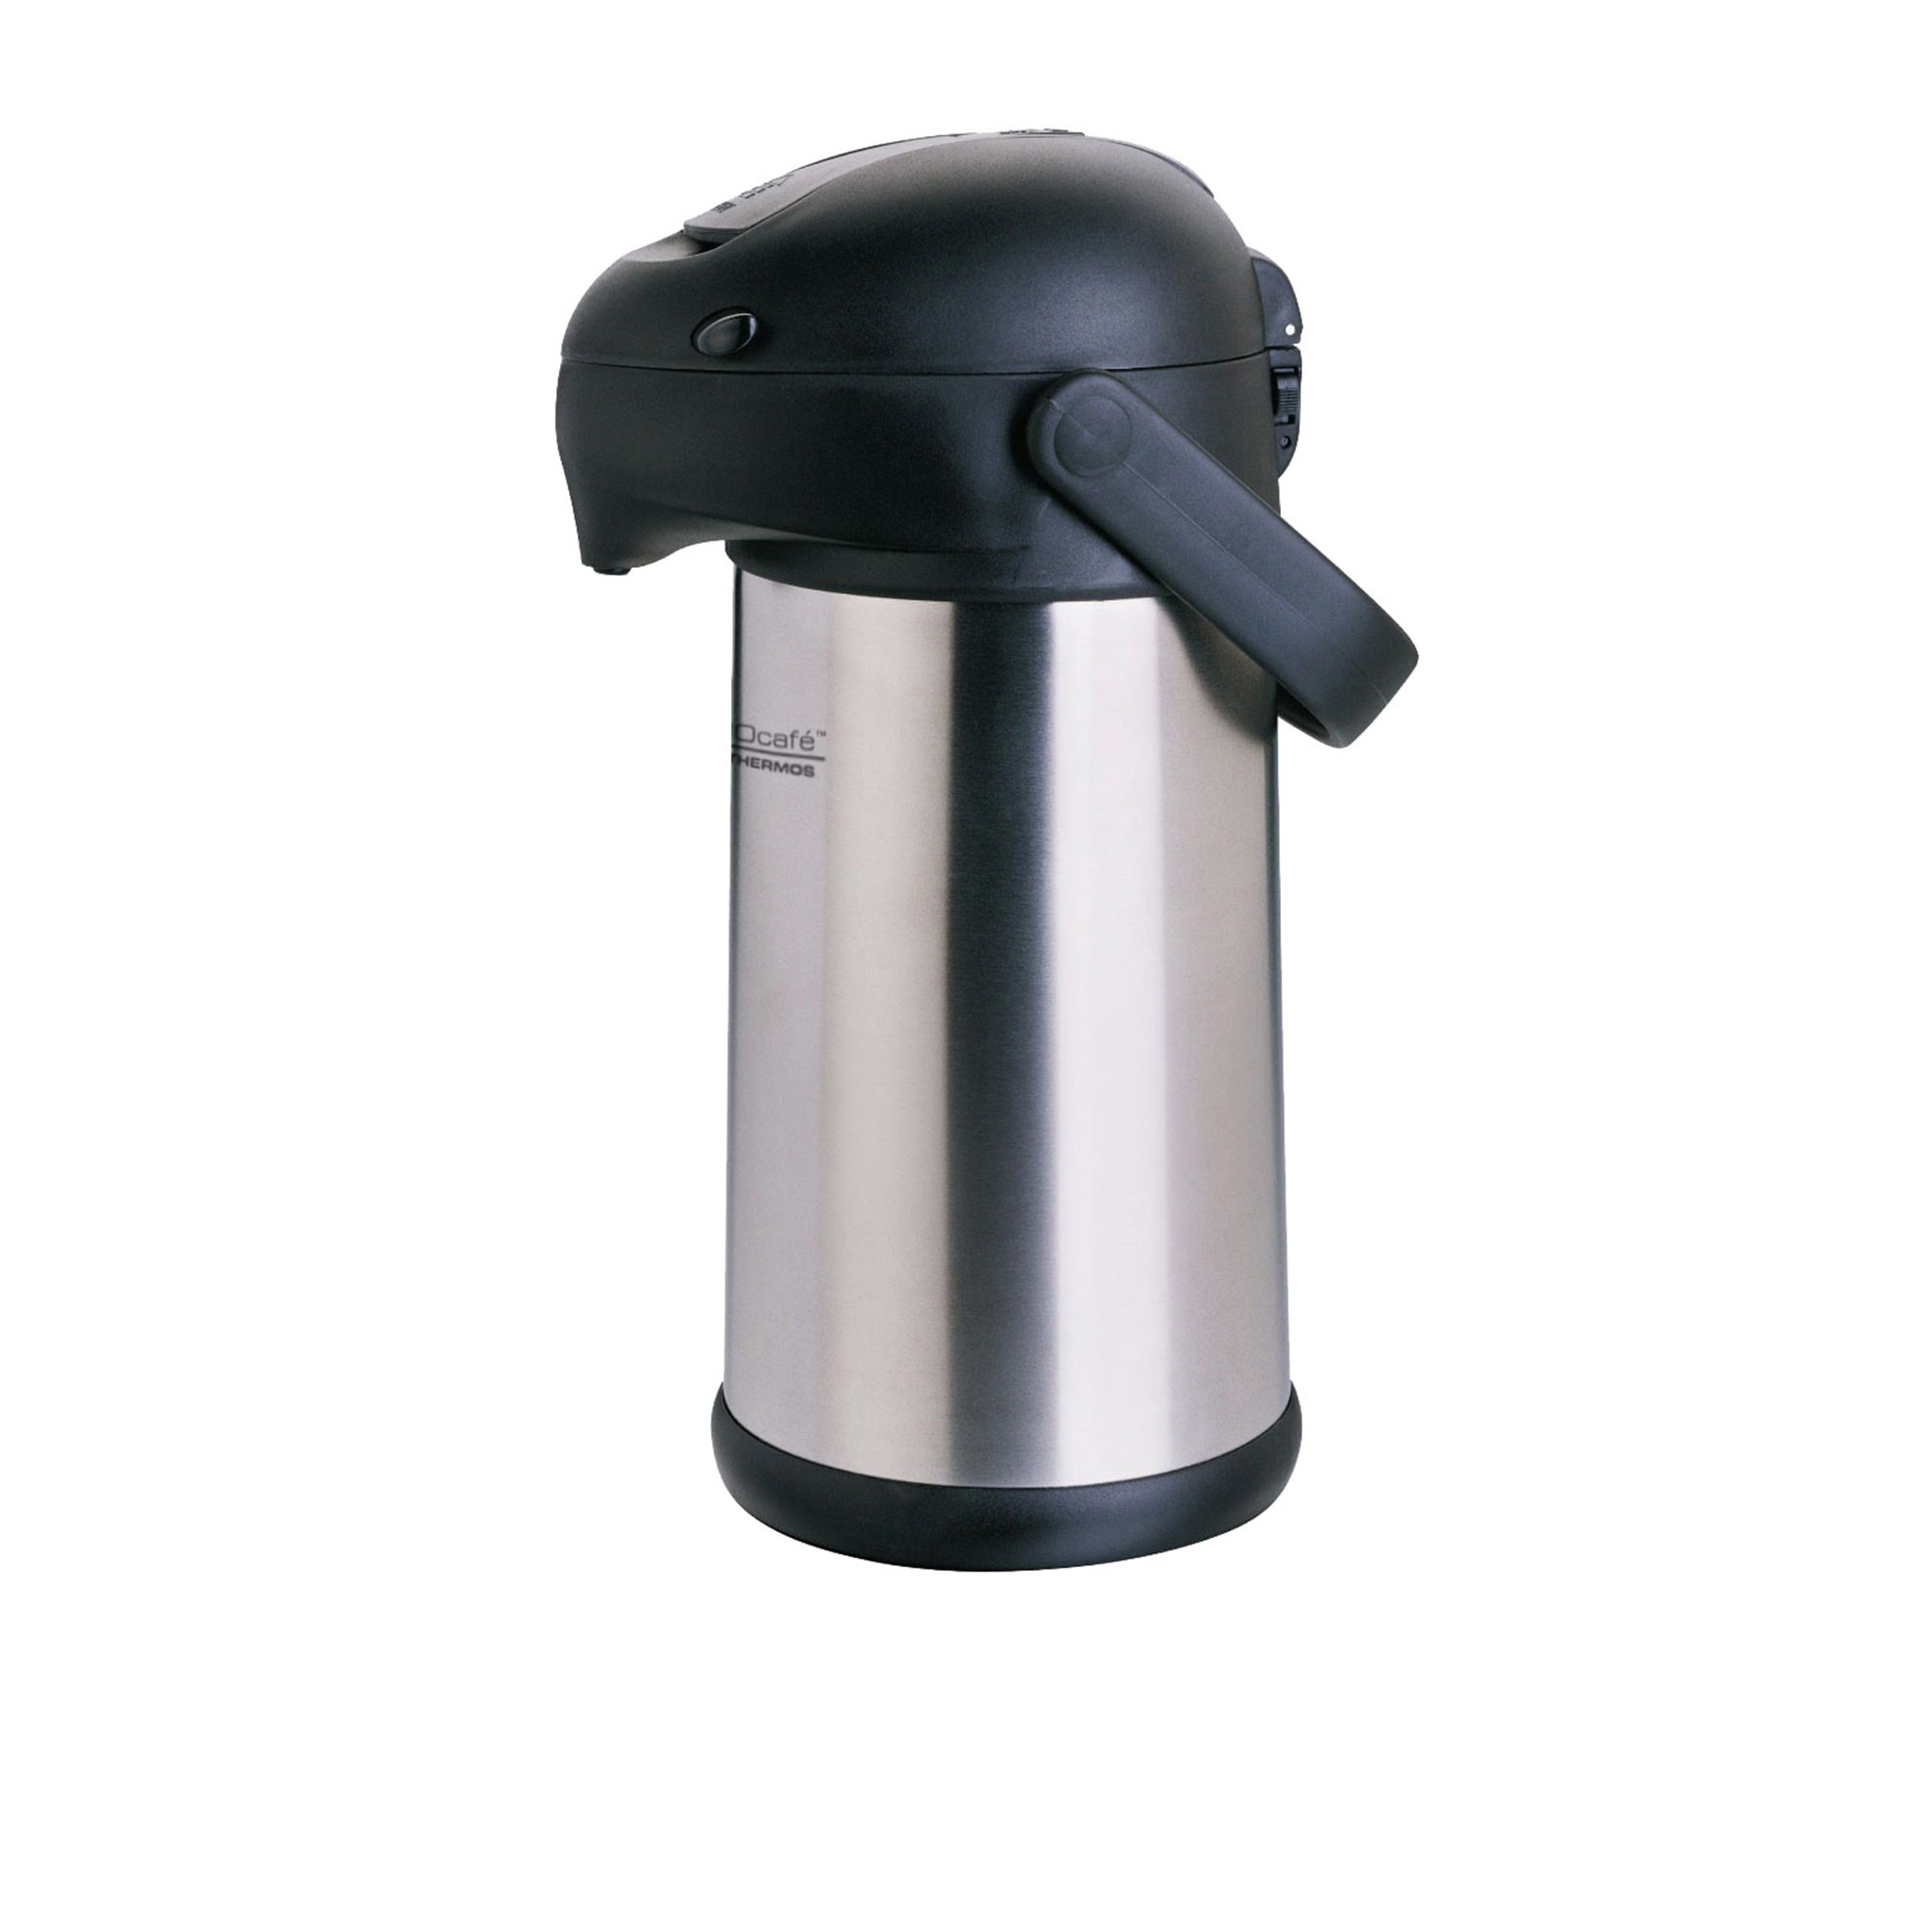 Thermos THERMOcafe Insulated Pump Pot 2.5L Image 1